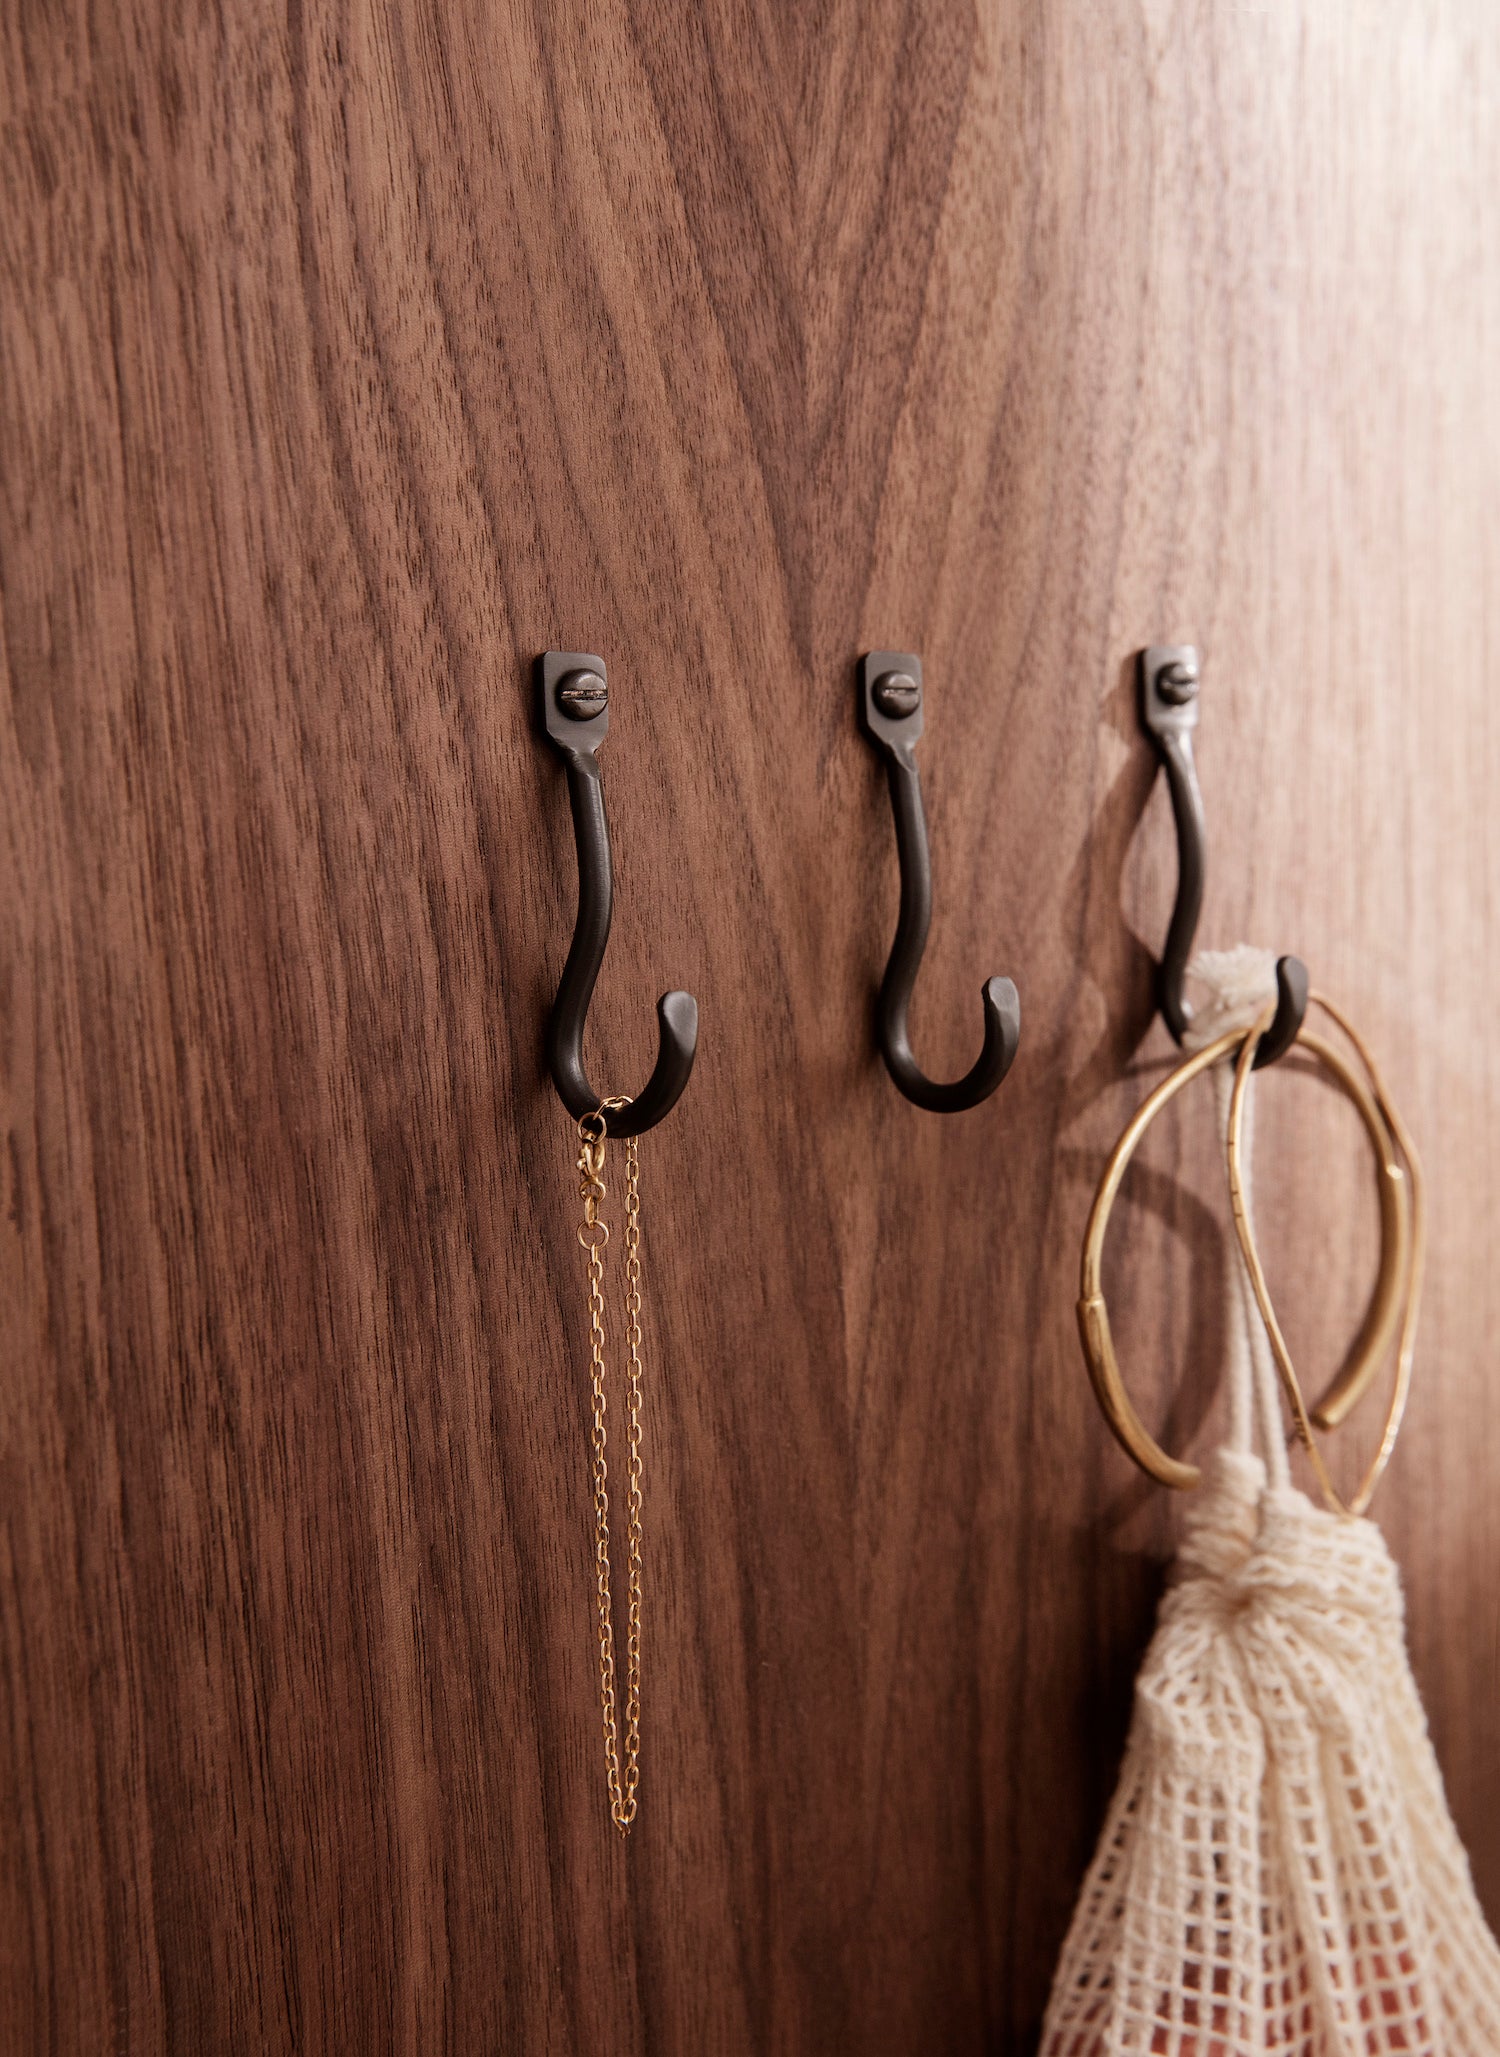 Organically shaped wall mounted hooks hand formed in black coated brass with a matte patina finish. 